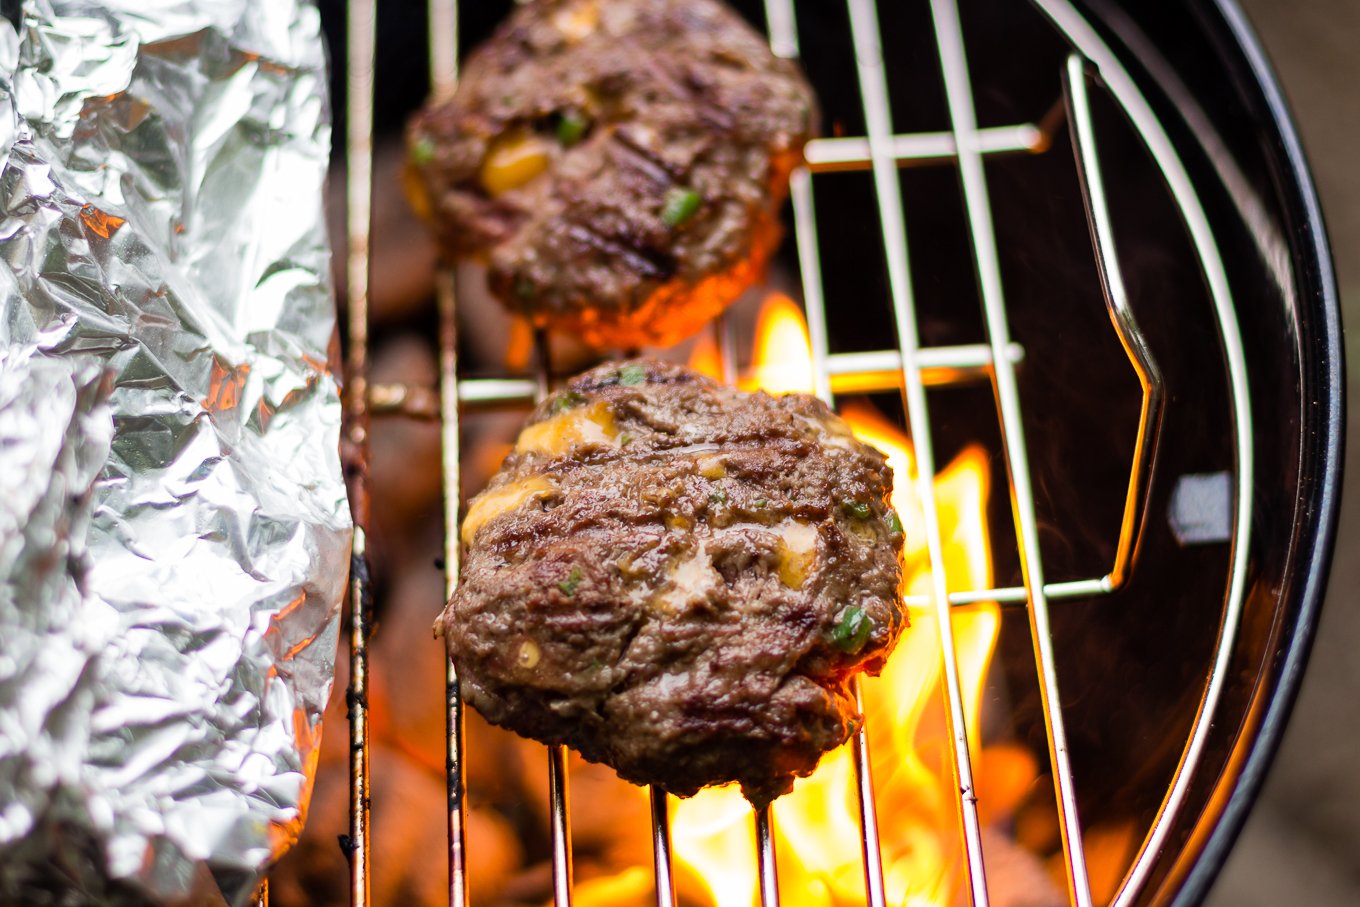 burger recipe, how to grill, nfl, tailgate recipes, how to use charcoal